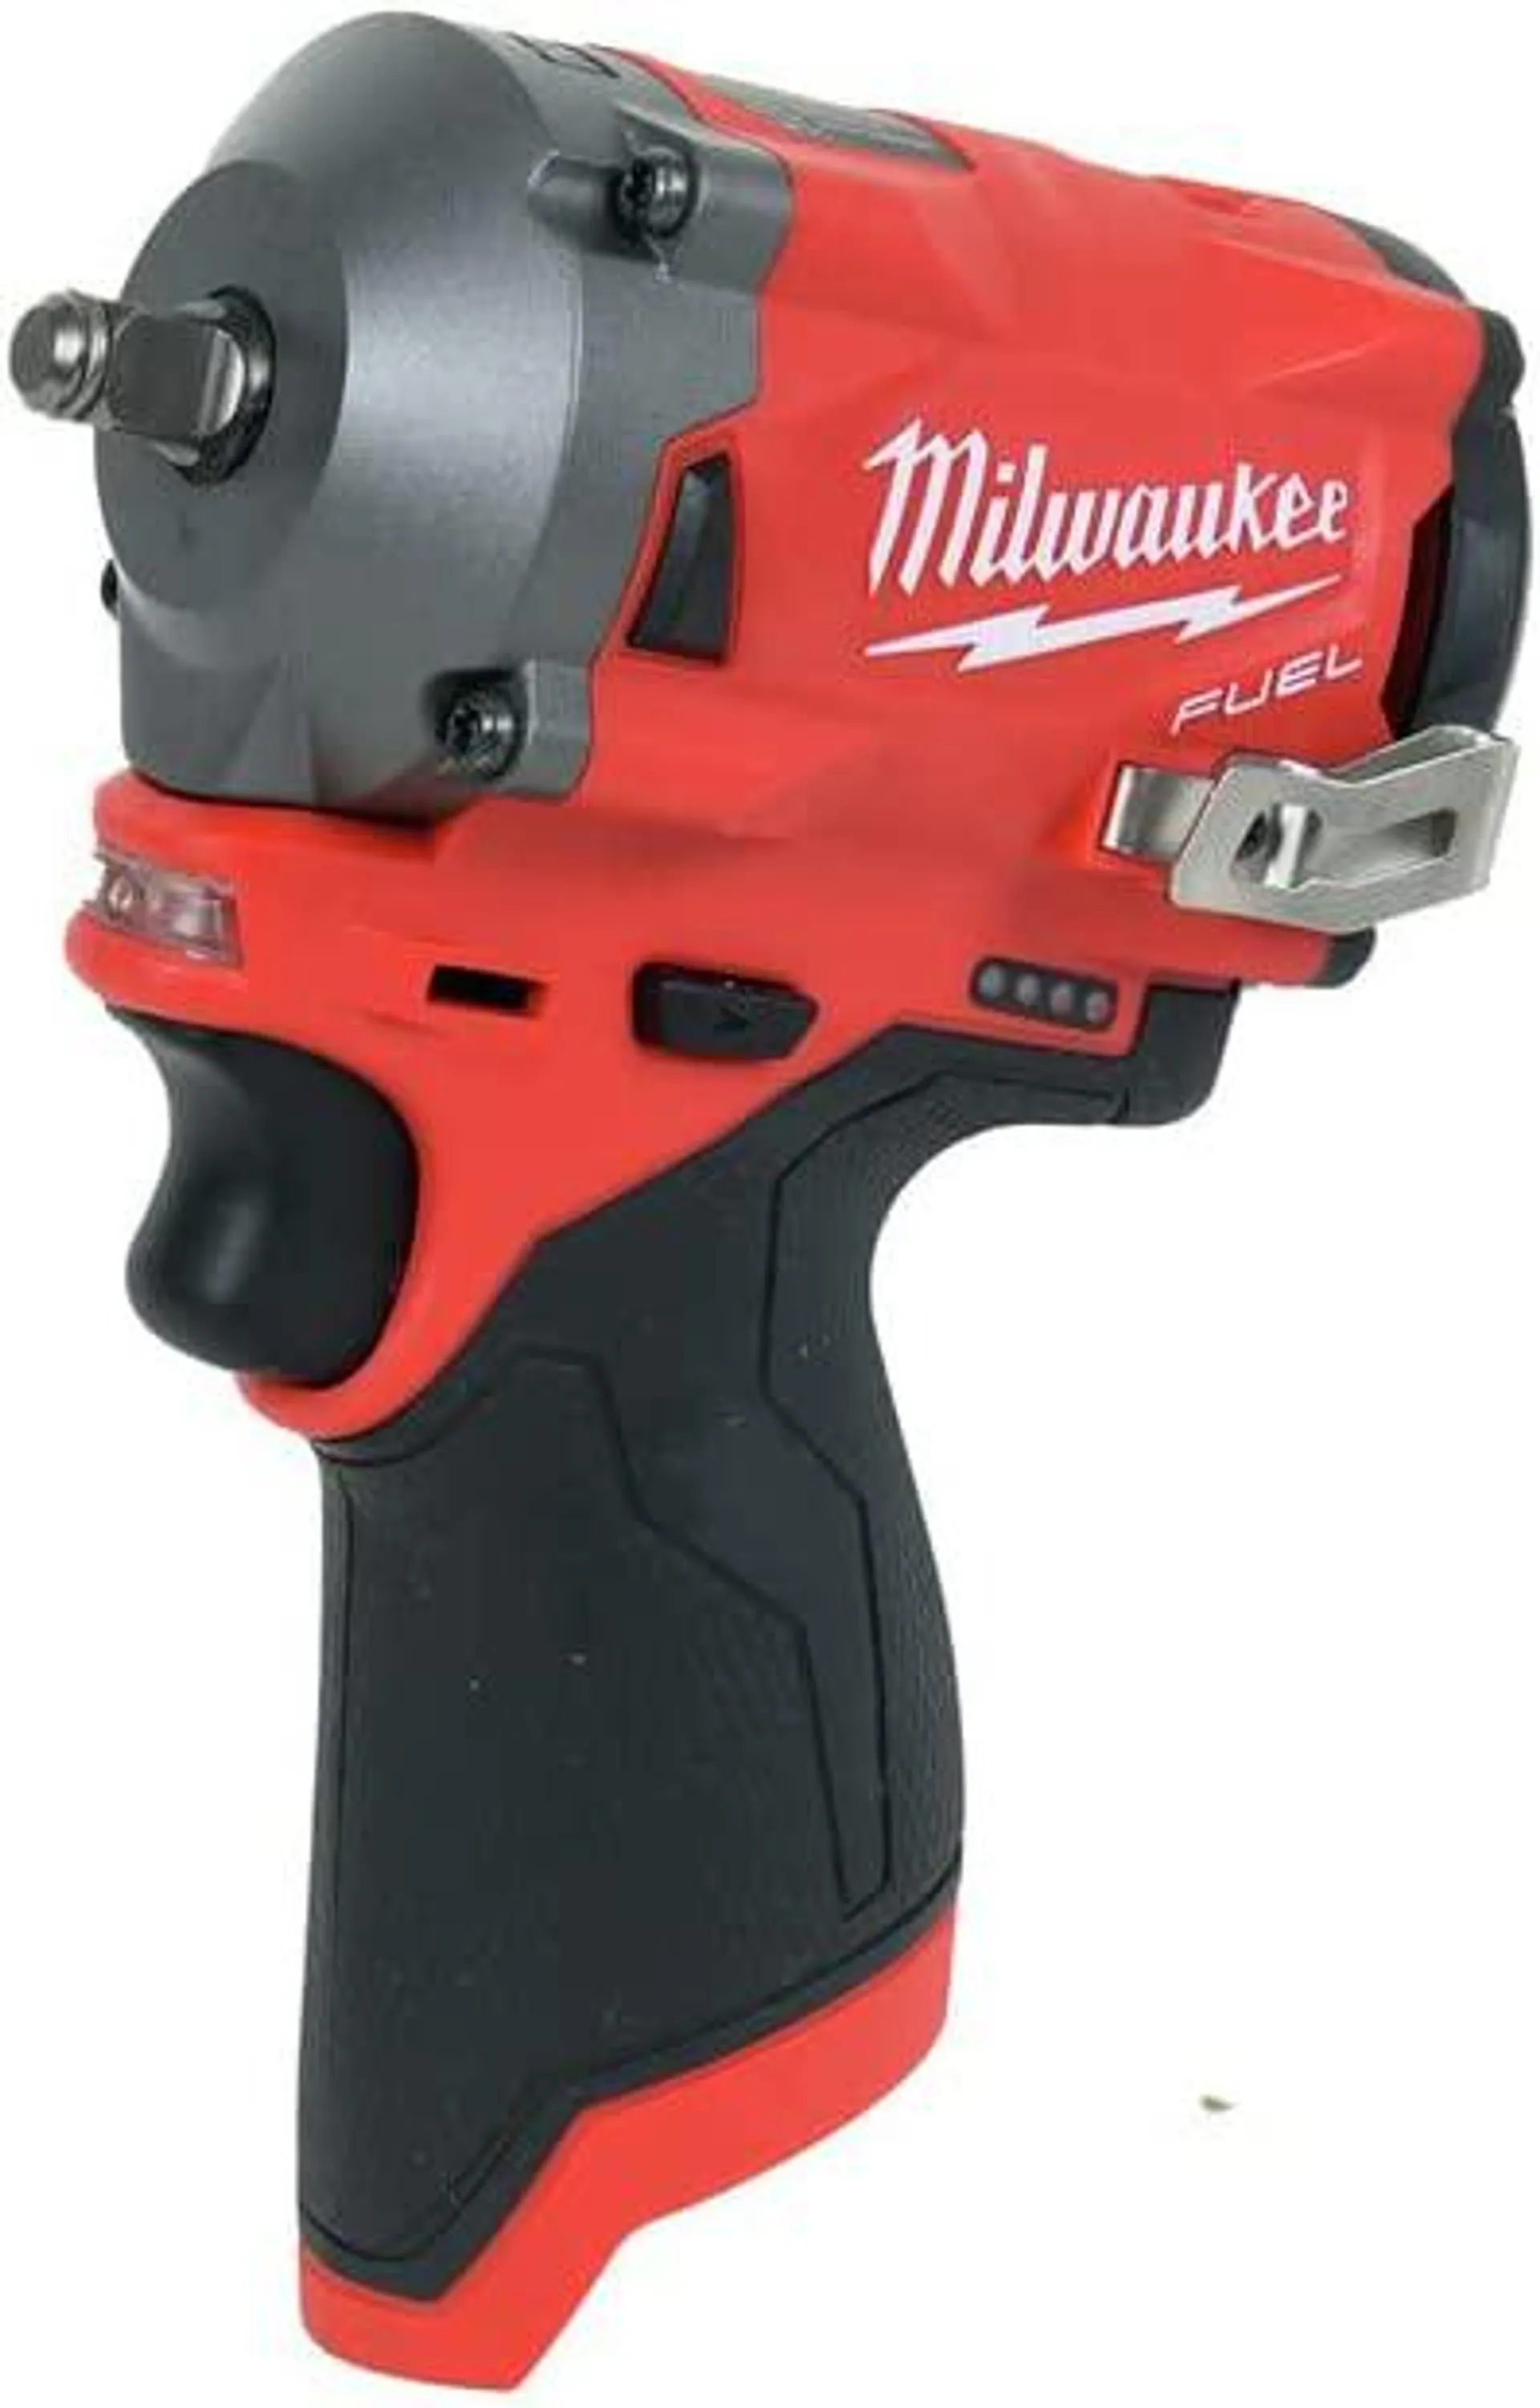 M12 Fuel Stubby 3/8" Impact Wrench (Bare Tool)